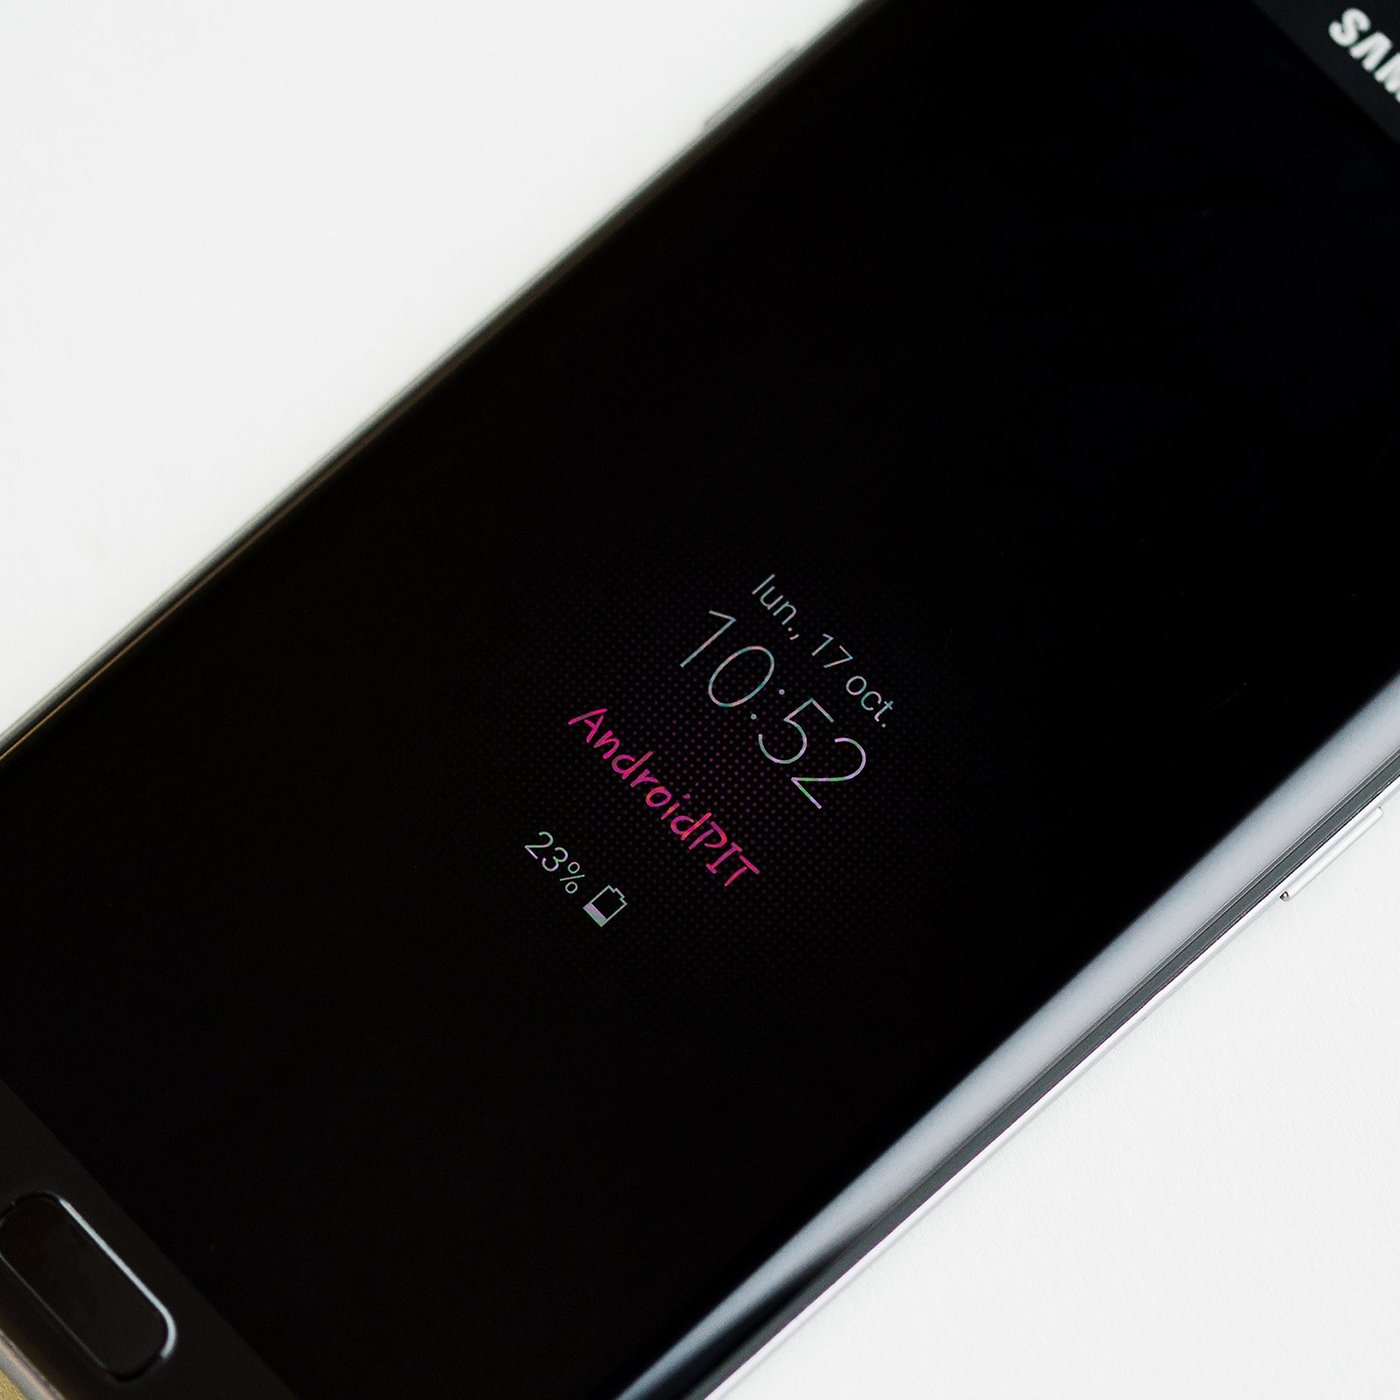 How to get an Always-on display on any Android phone